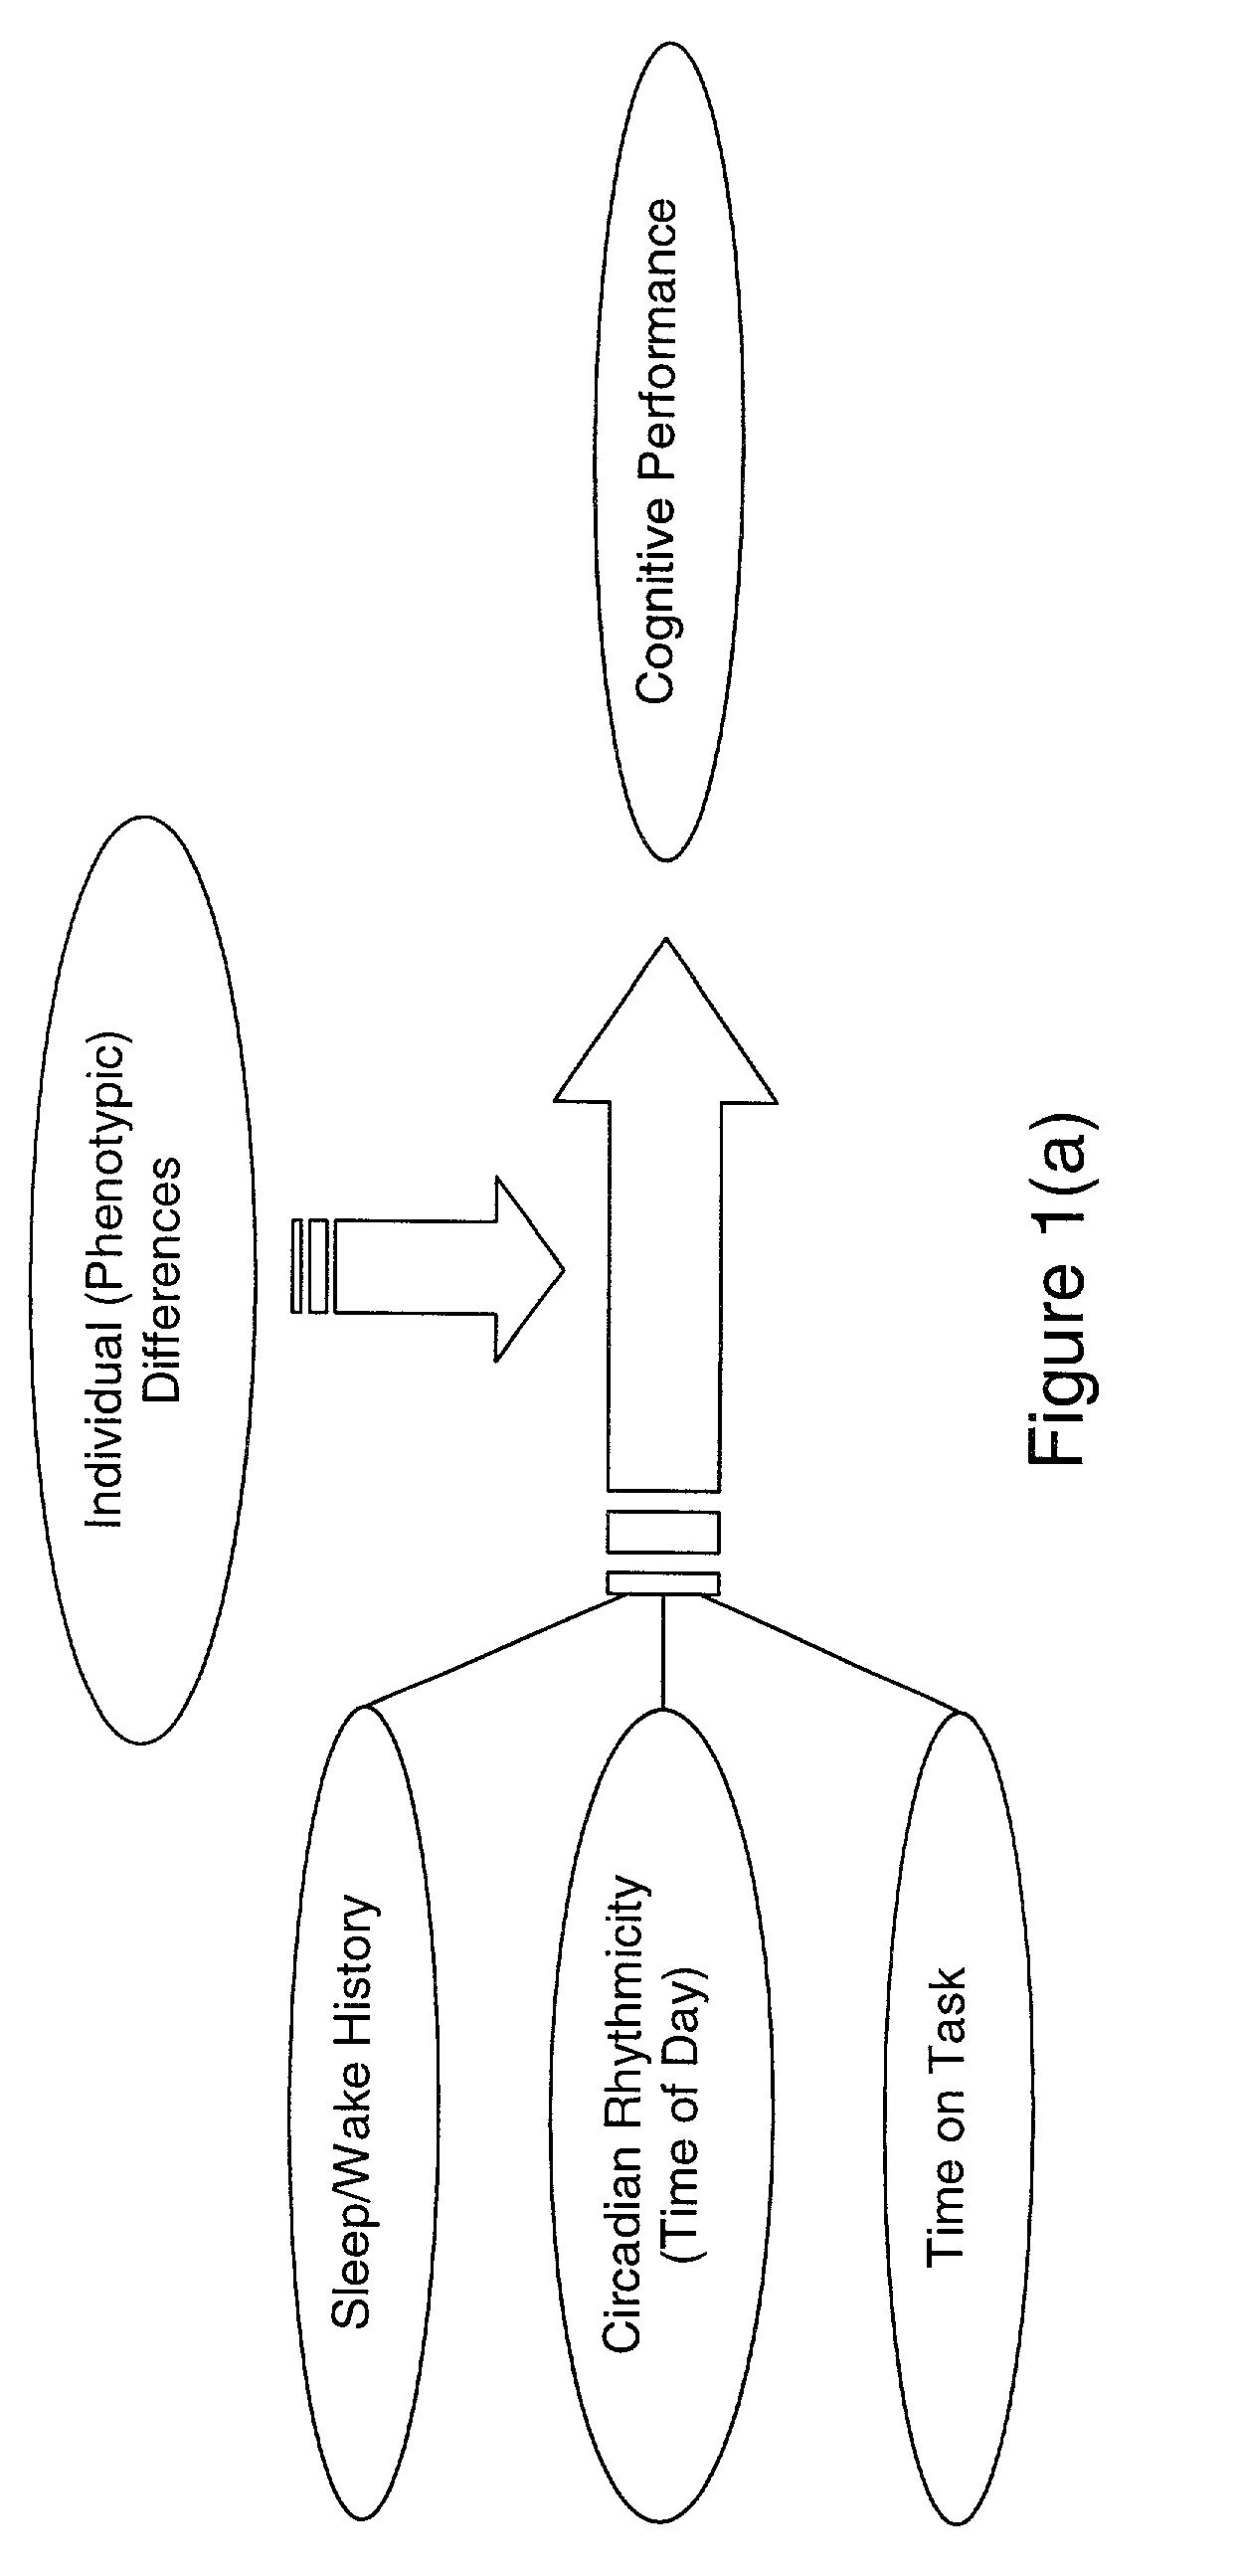 Method and system for predicting human cognitive performance